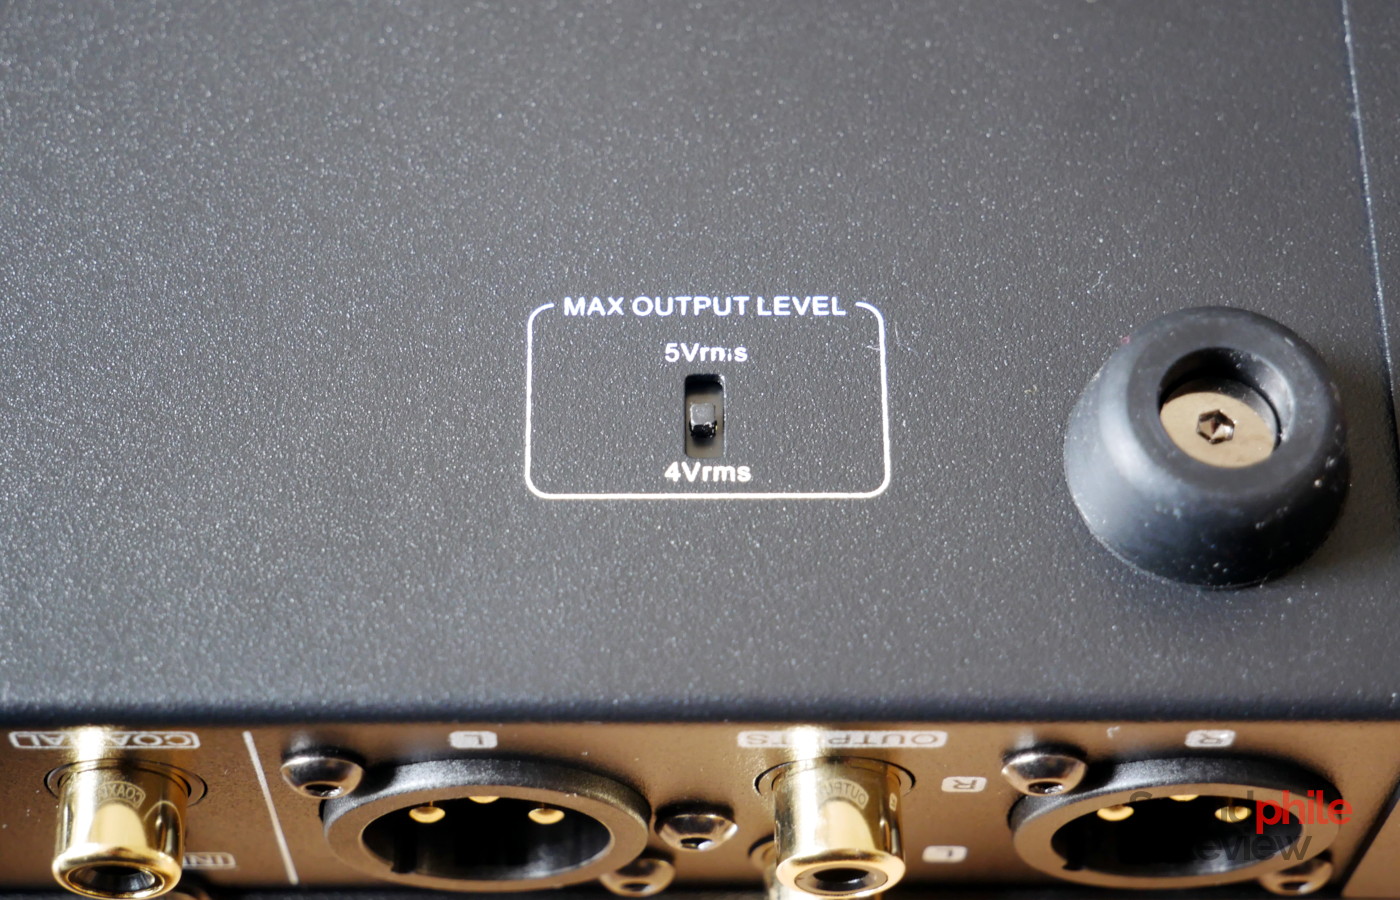 The SMSL DO200 Pro has a switch to select 4 V or 5 V output.